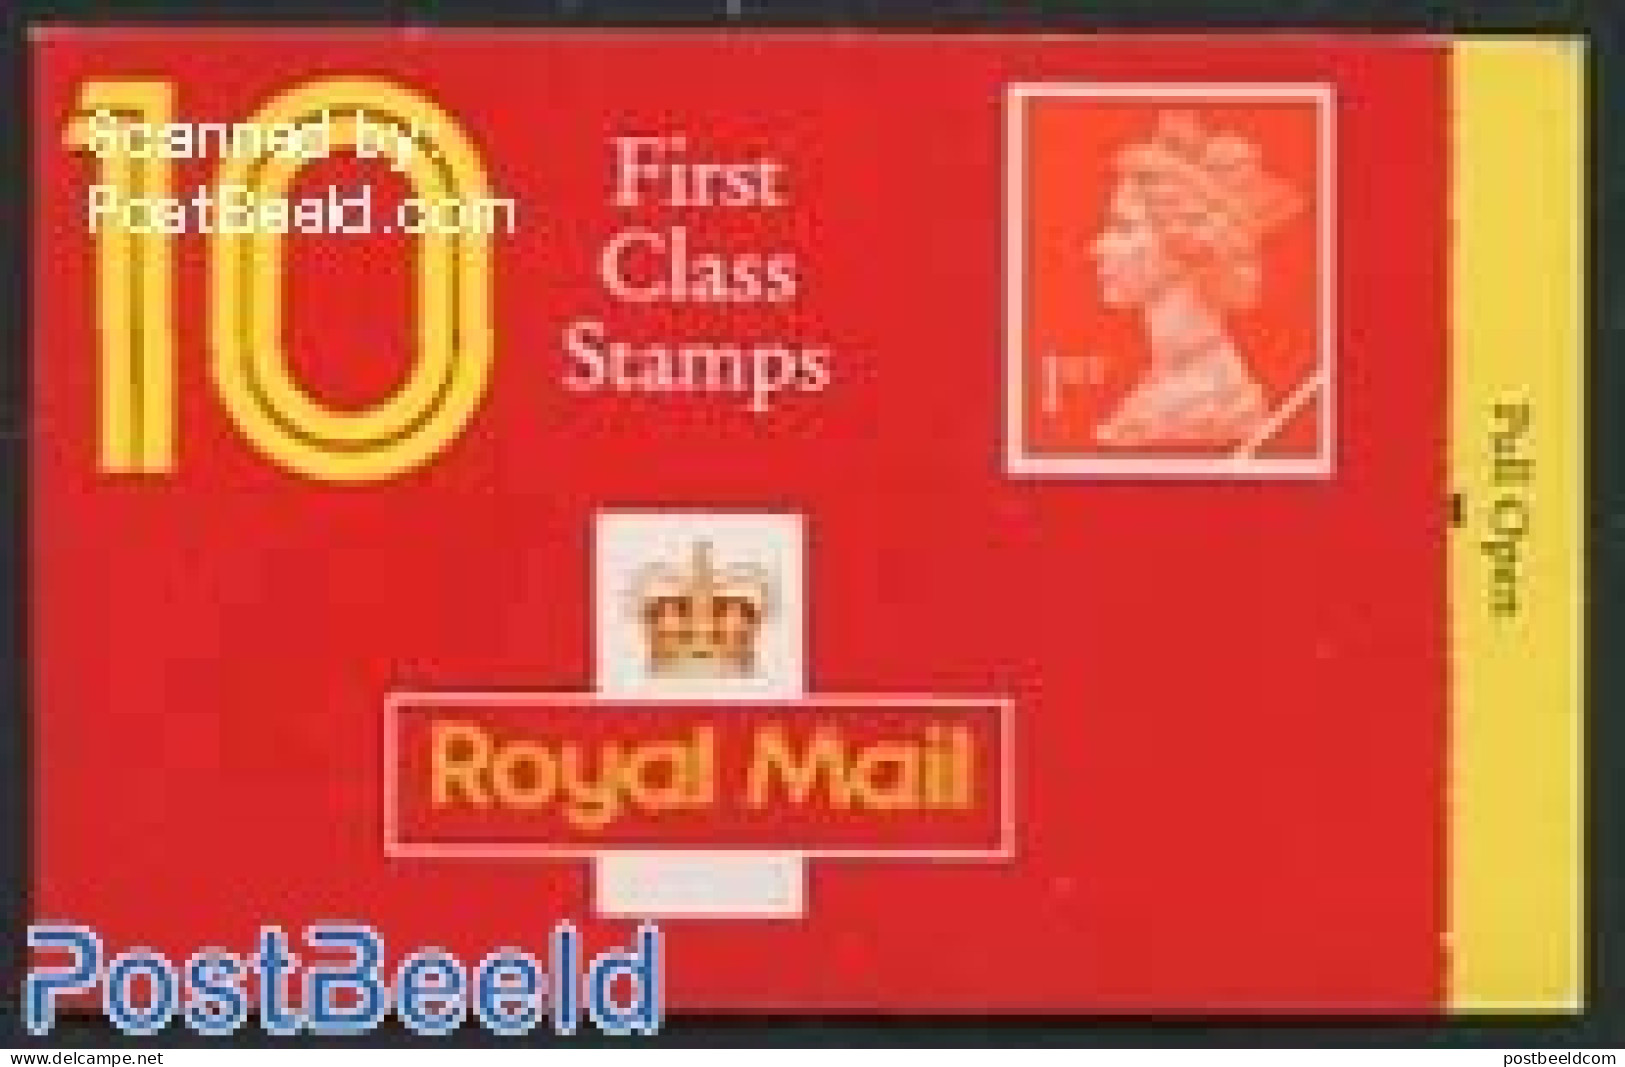 Great Britain 1990 Definitives Booklet, Walsall, Freepost London Inside, Mint NH, Stamp Booklets - Ungebraucht